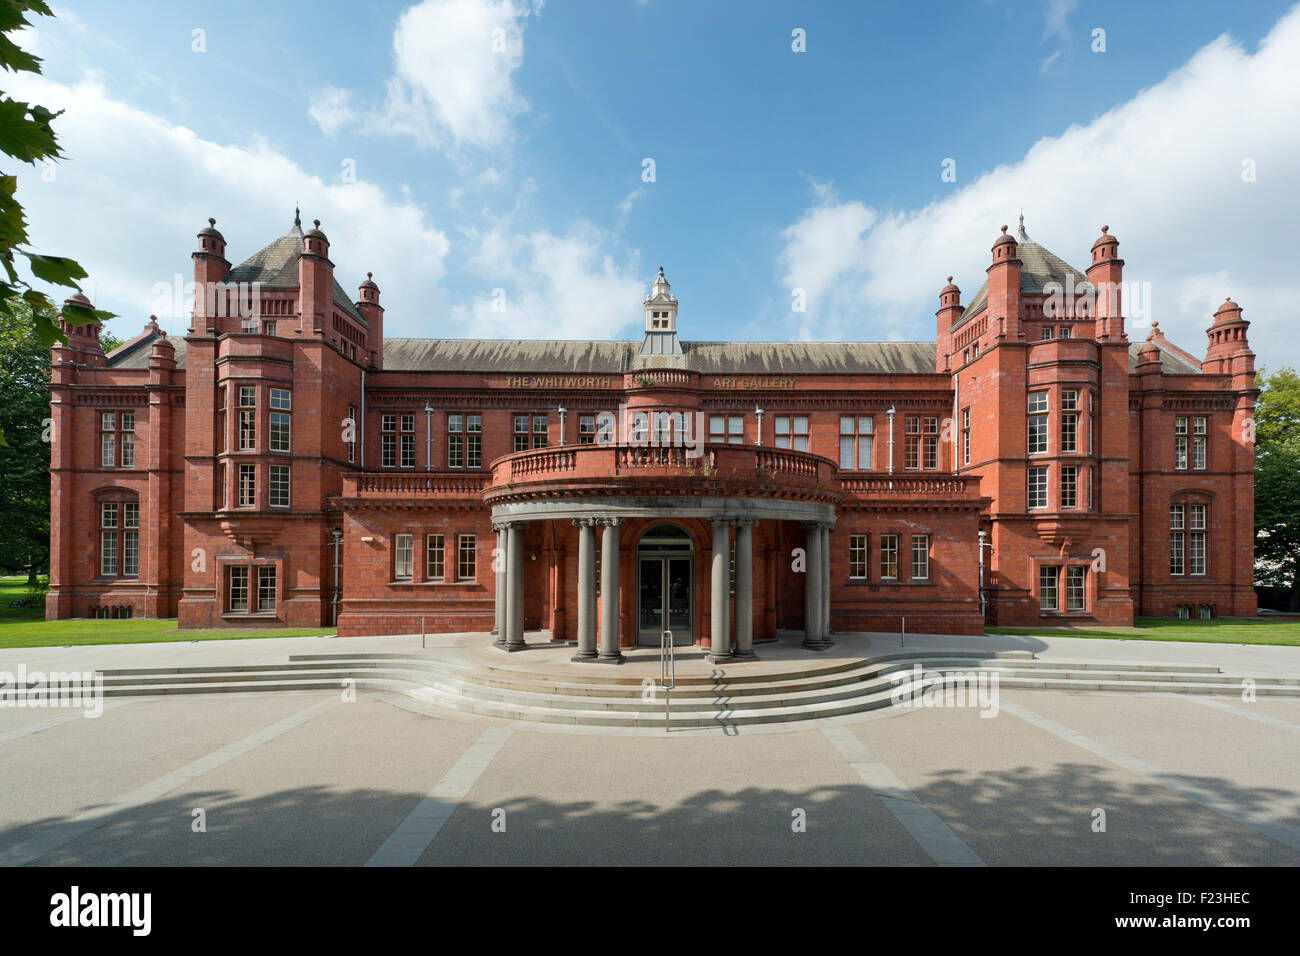 The recently refurbished Whitworth Art Gallery located on the Oxford Road campus of The University of Manchester. Stock Photo